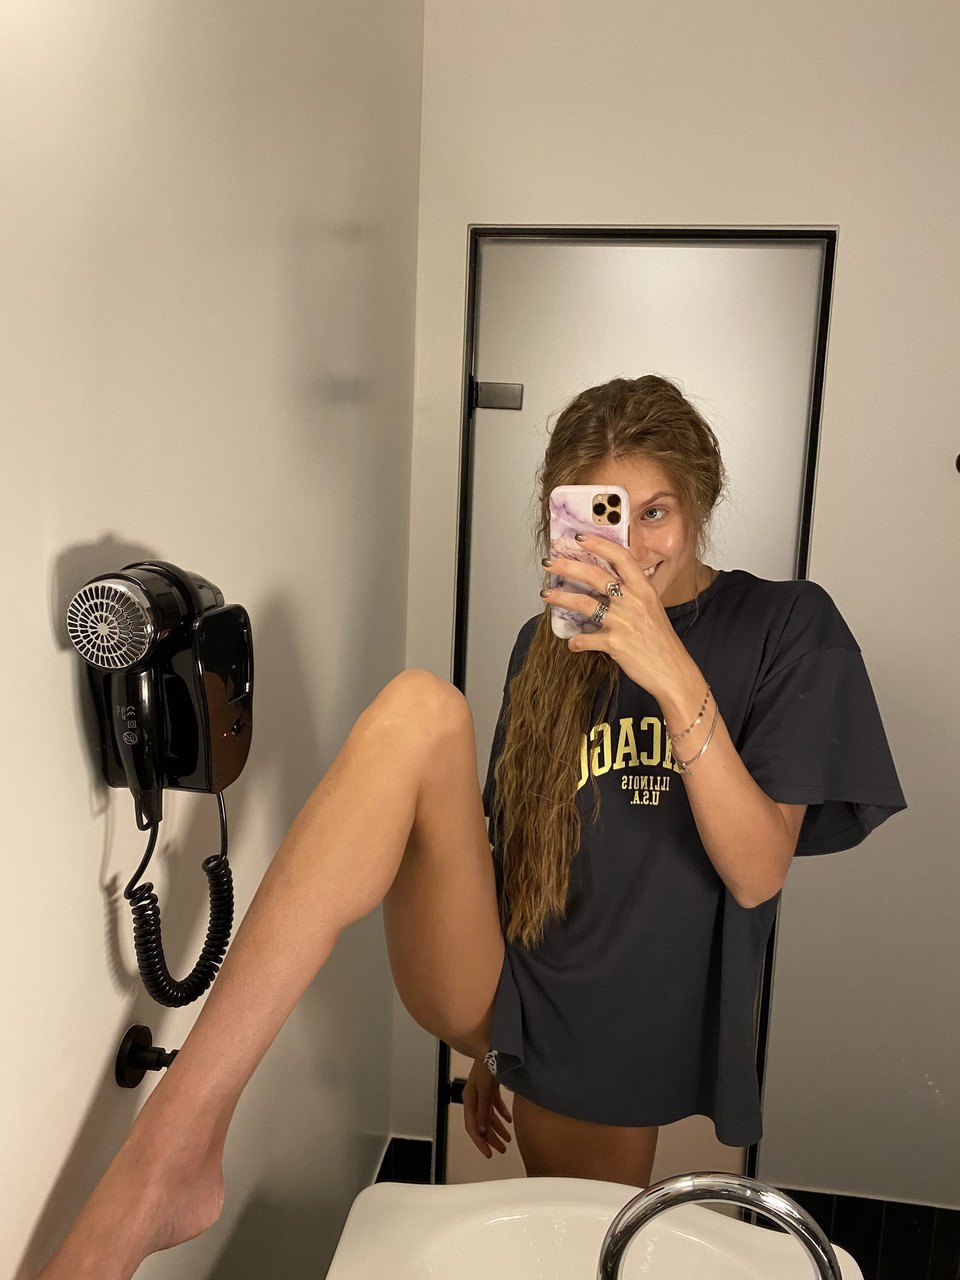 Skinny babe takes nude selfies showing her tiny tits and her tight ass porno foto #423874984 | OnlyFans JasminJass Pics, Homemade, mobiele porno